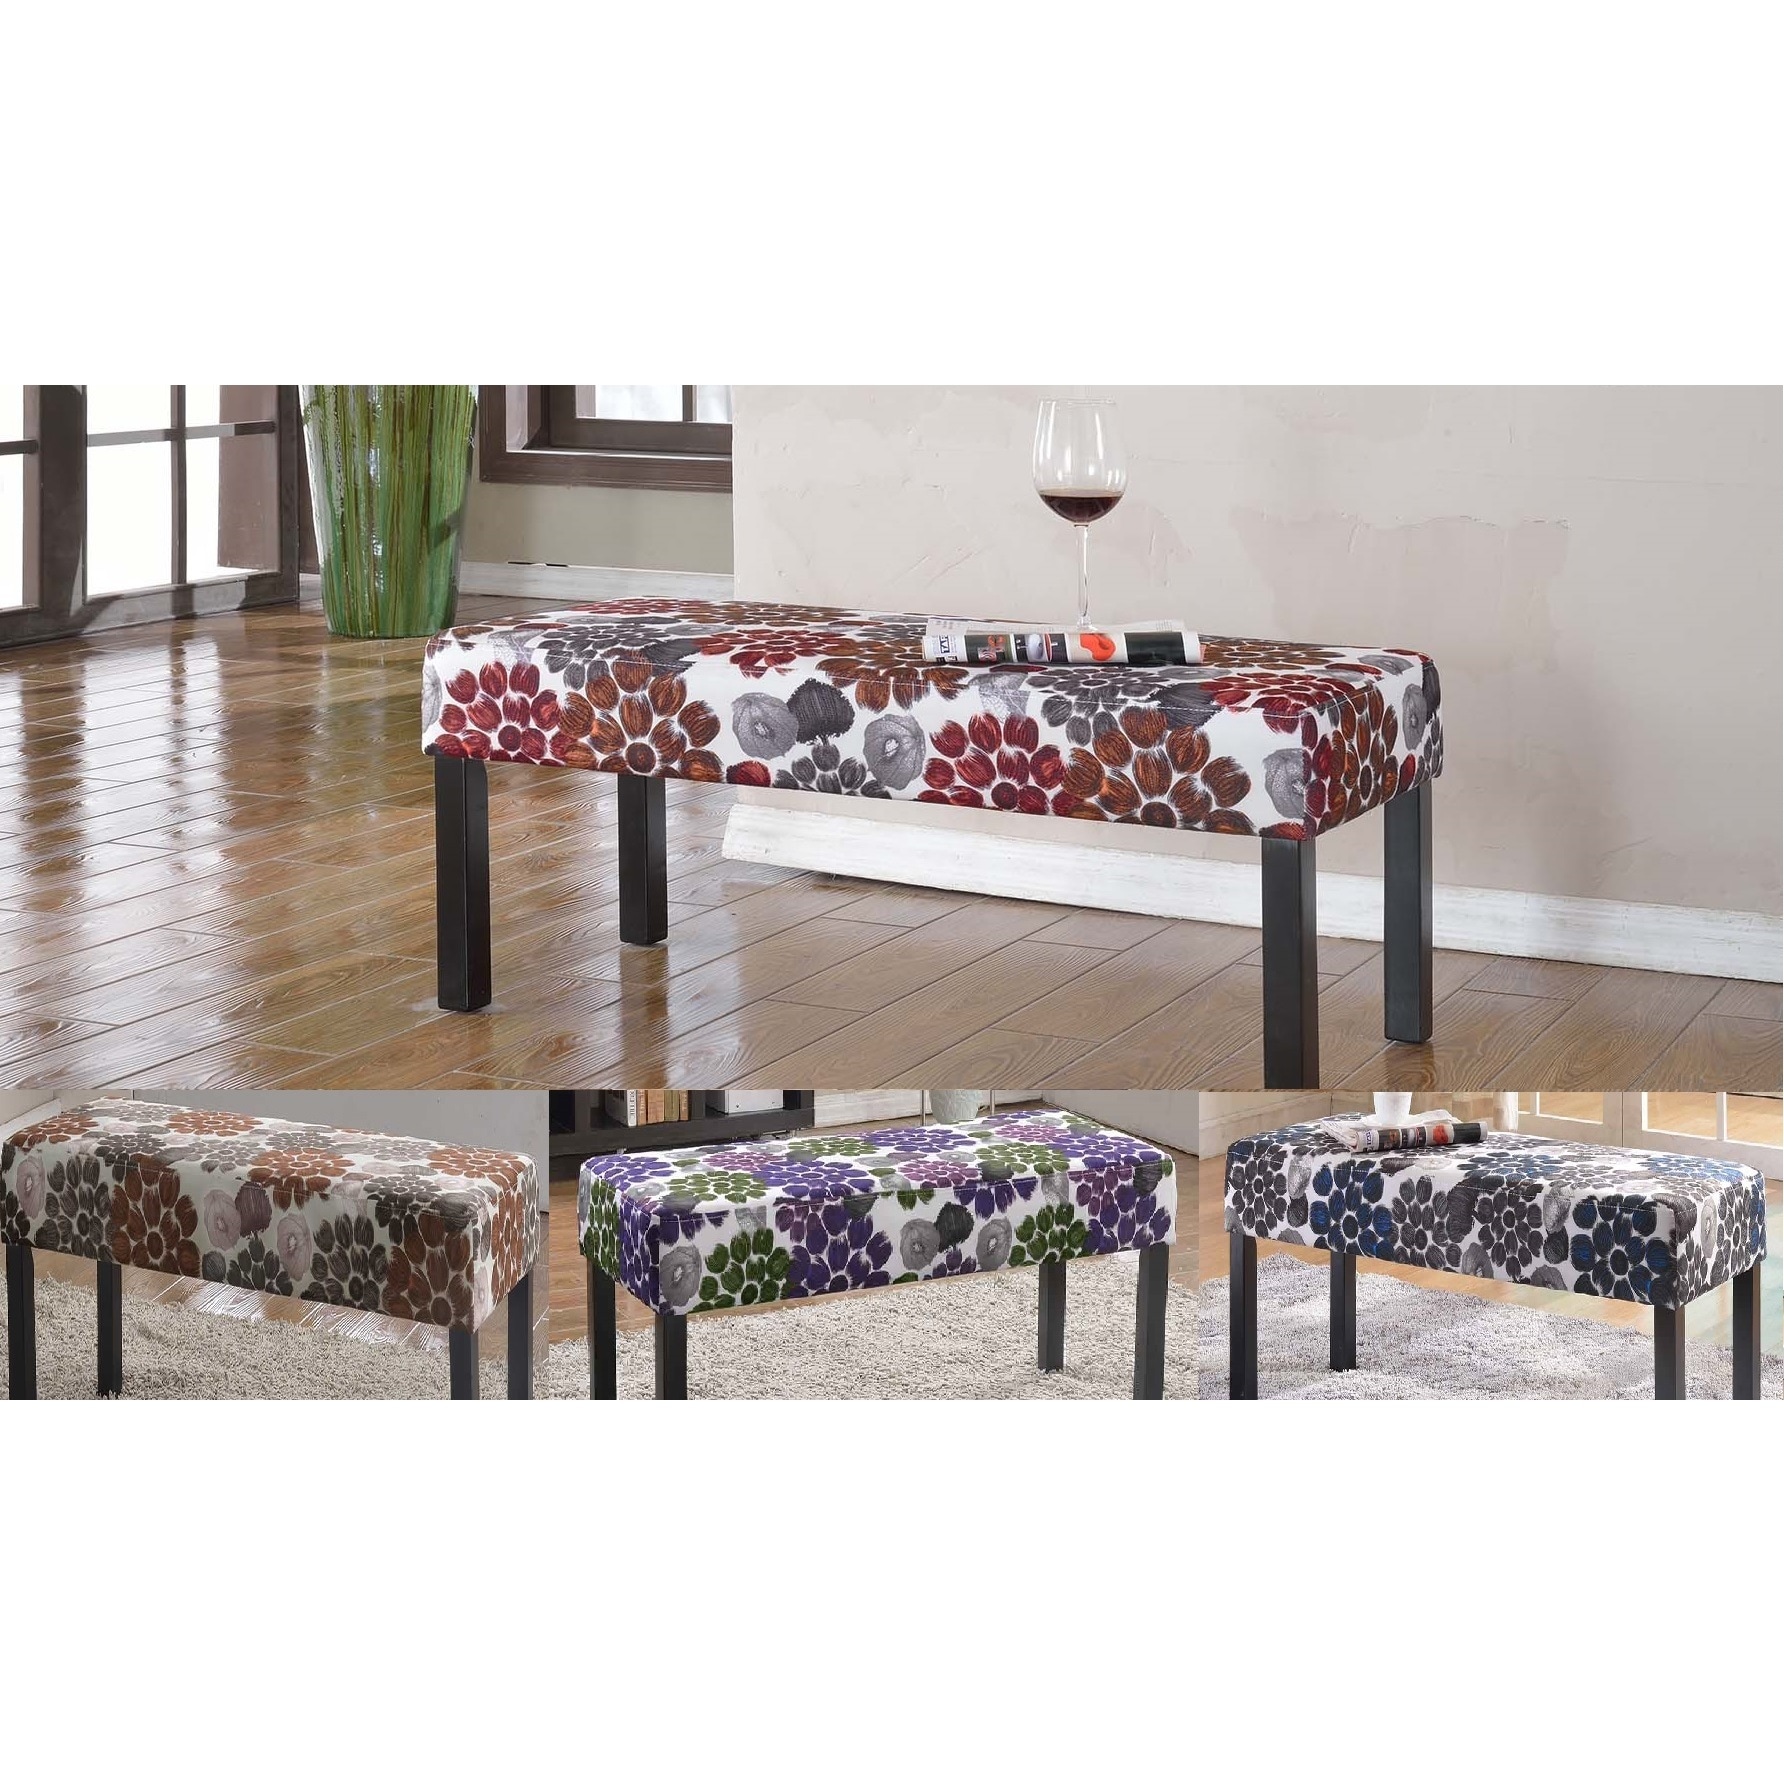 Alma Fabric Upholstered Decorative Bench On Sale Overstock